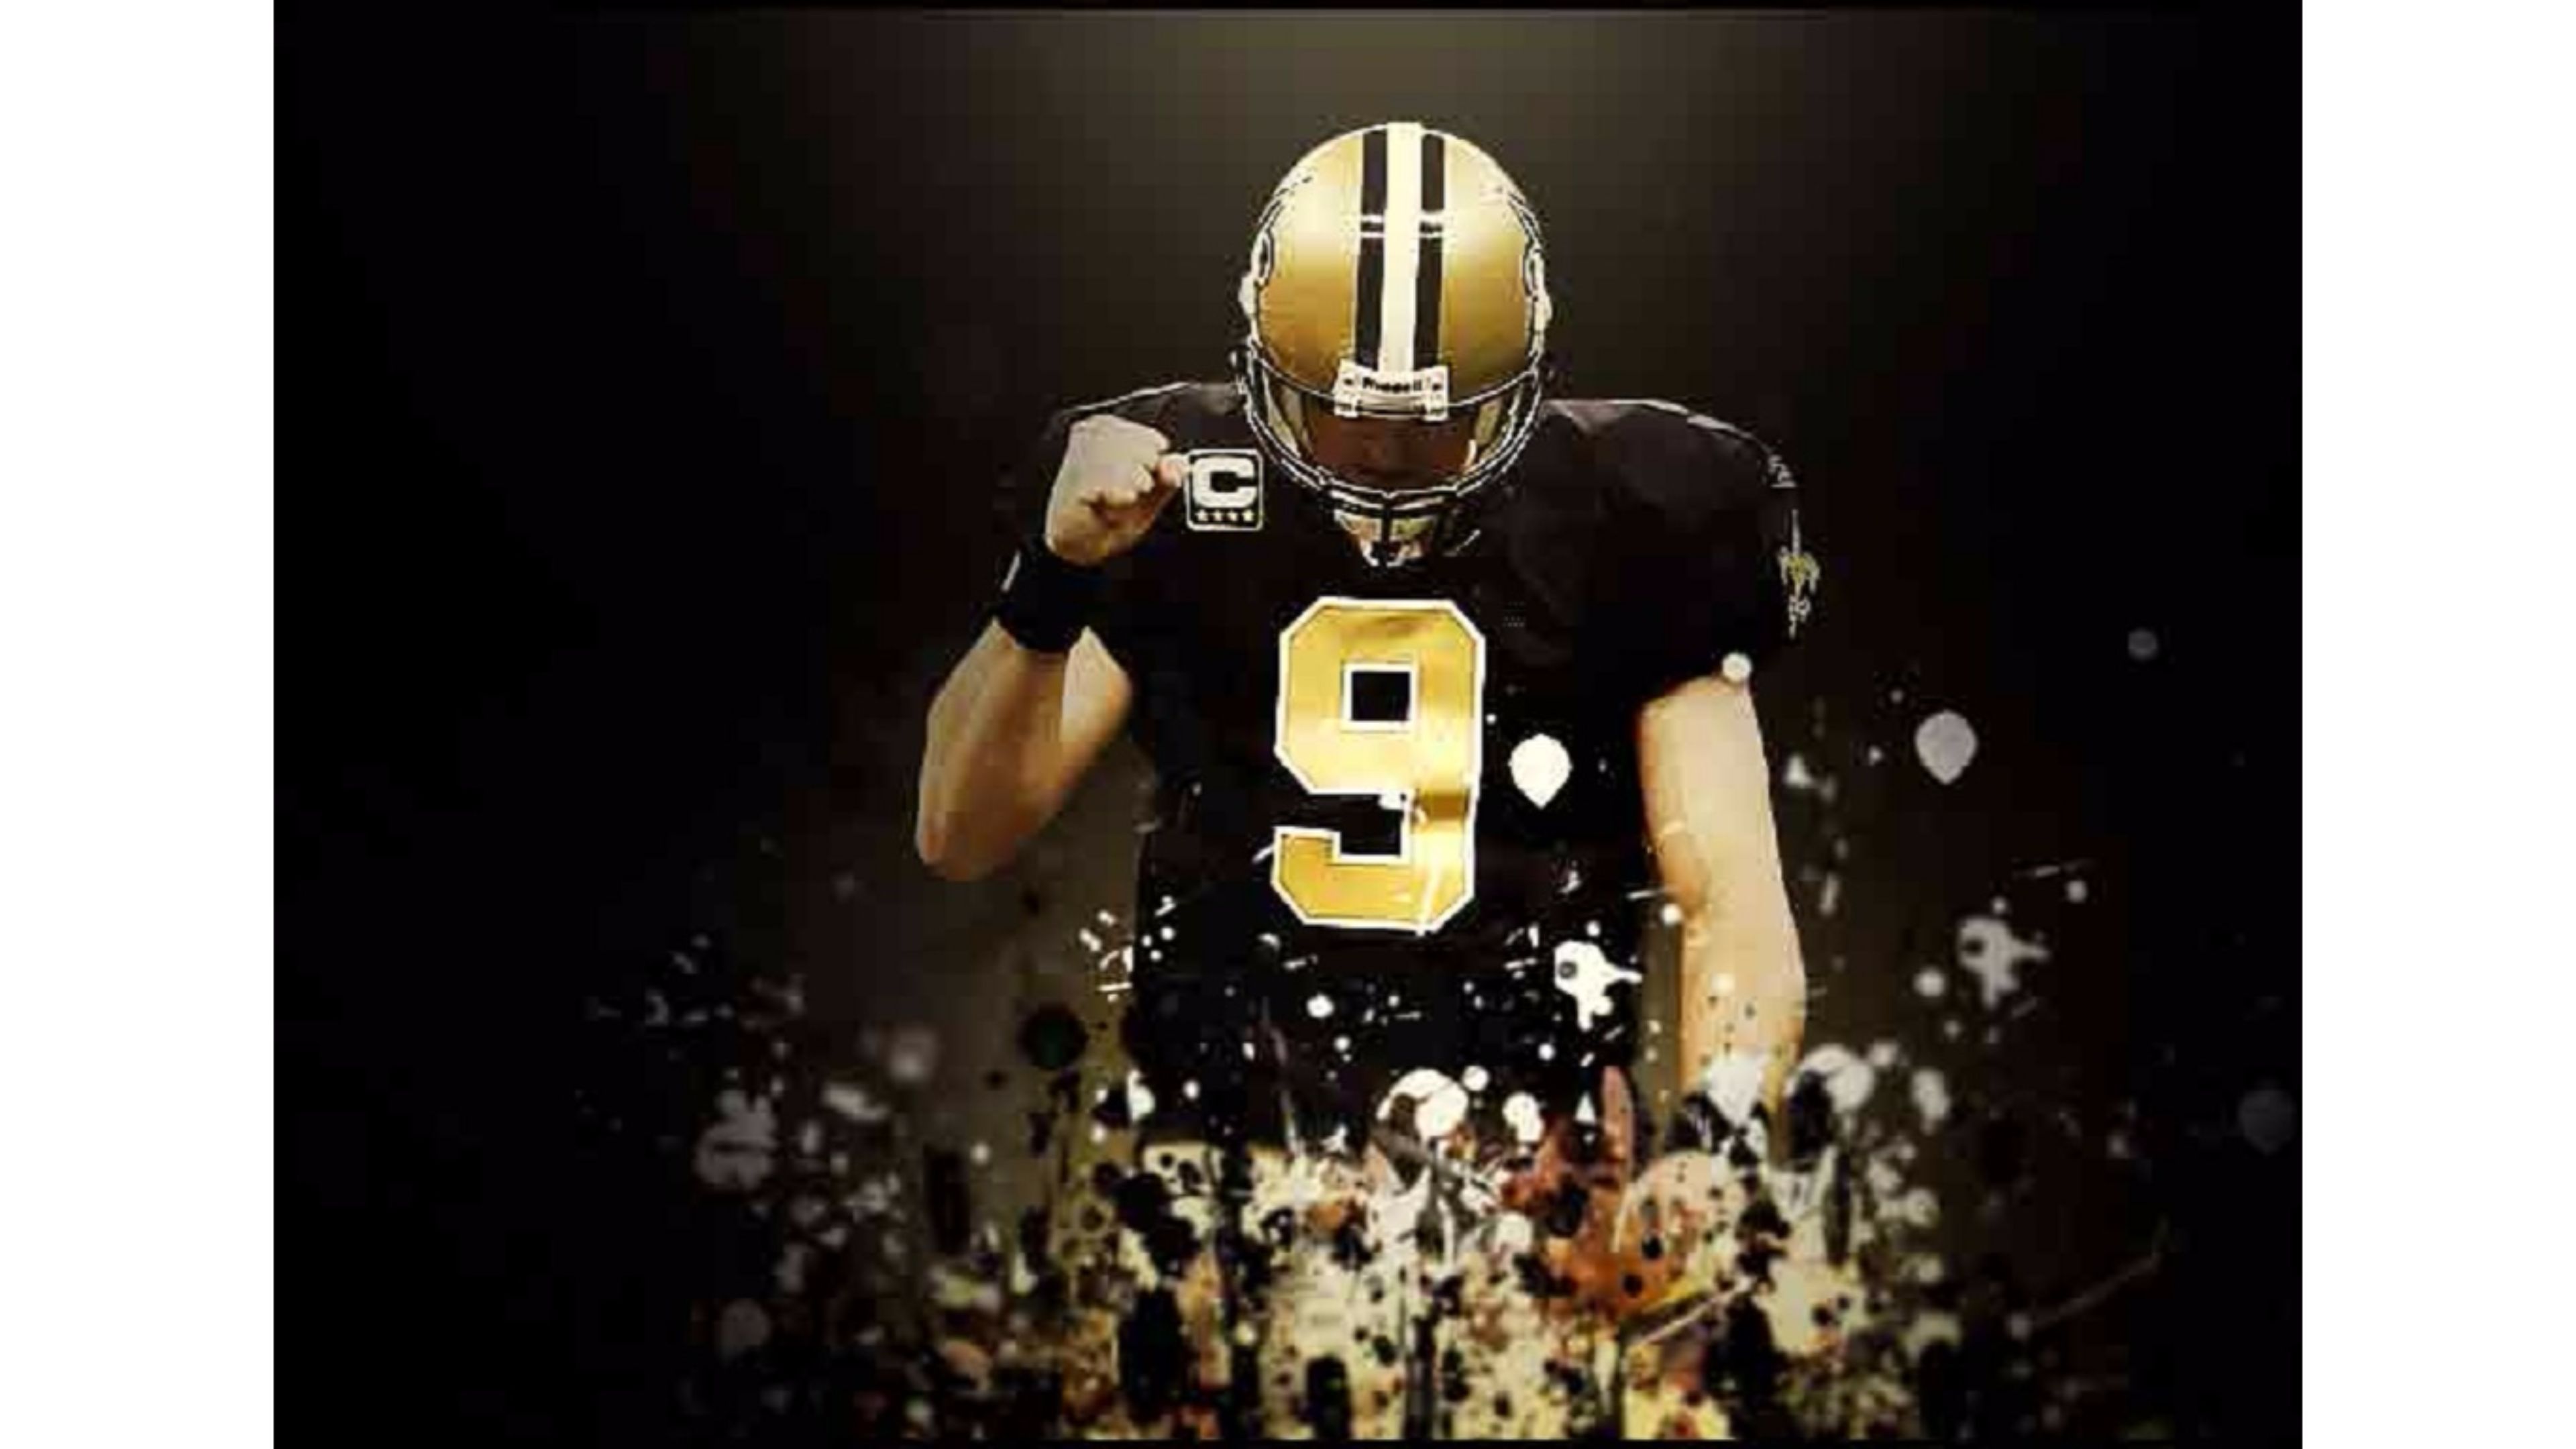 Drew Brees Wallpaper HD Collection For